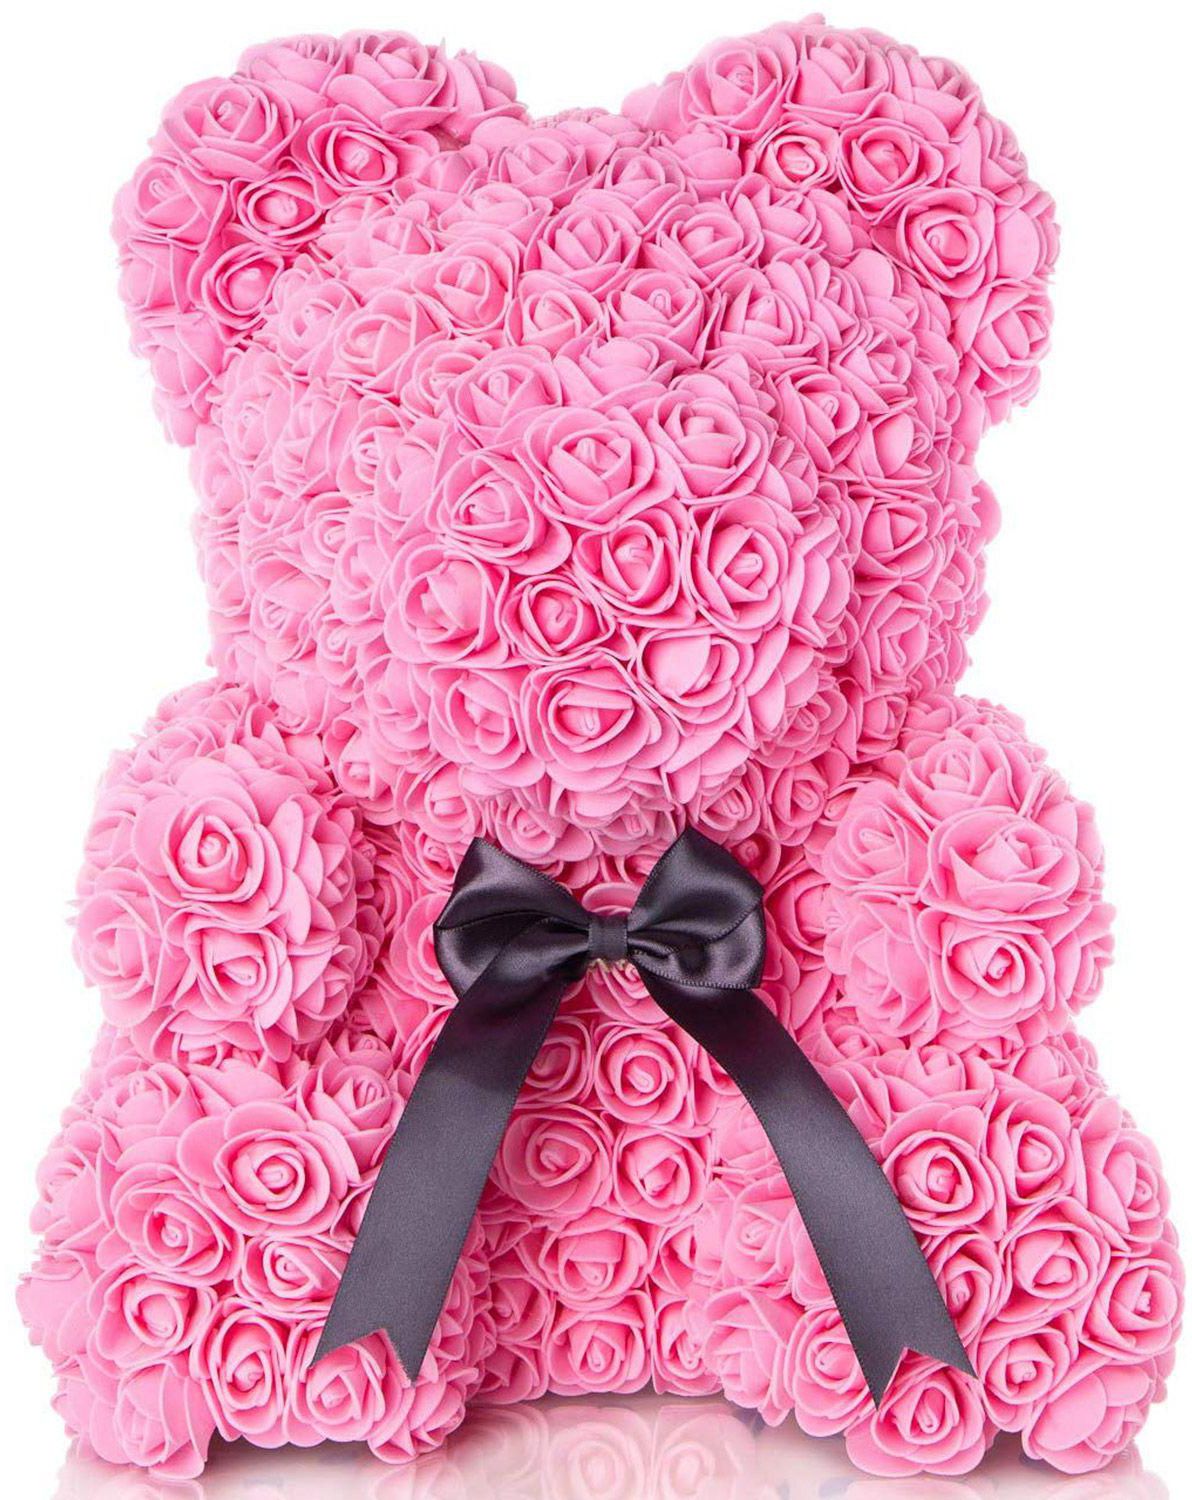 Artificial Roses Teddy Light Pink